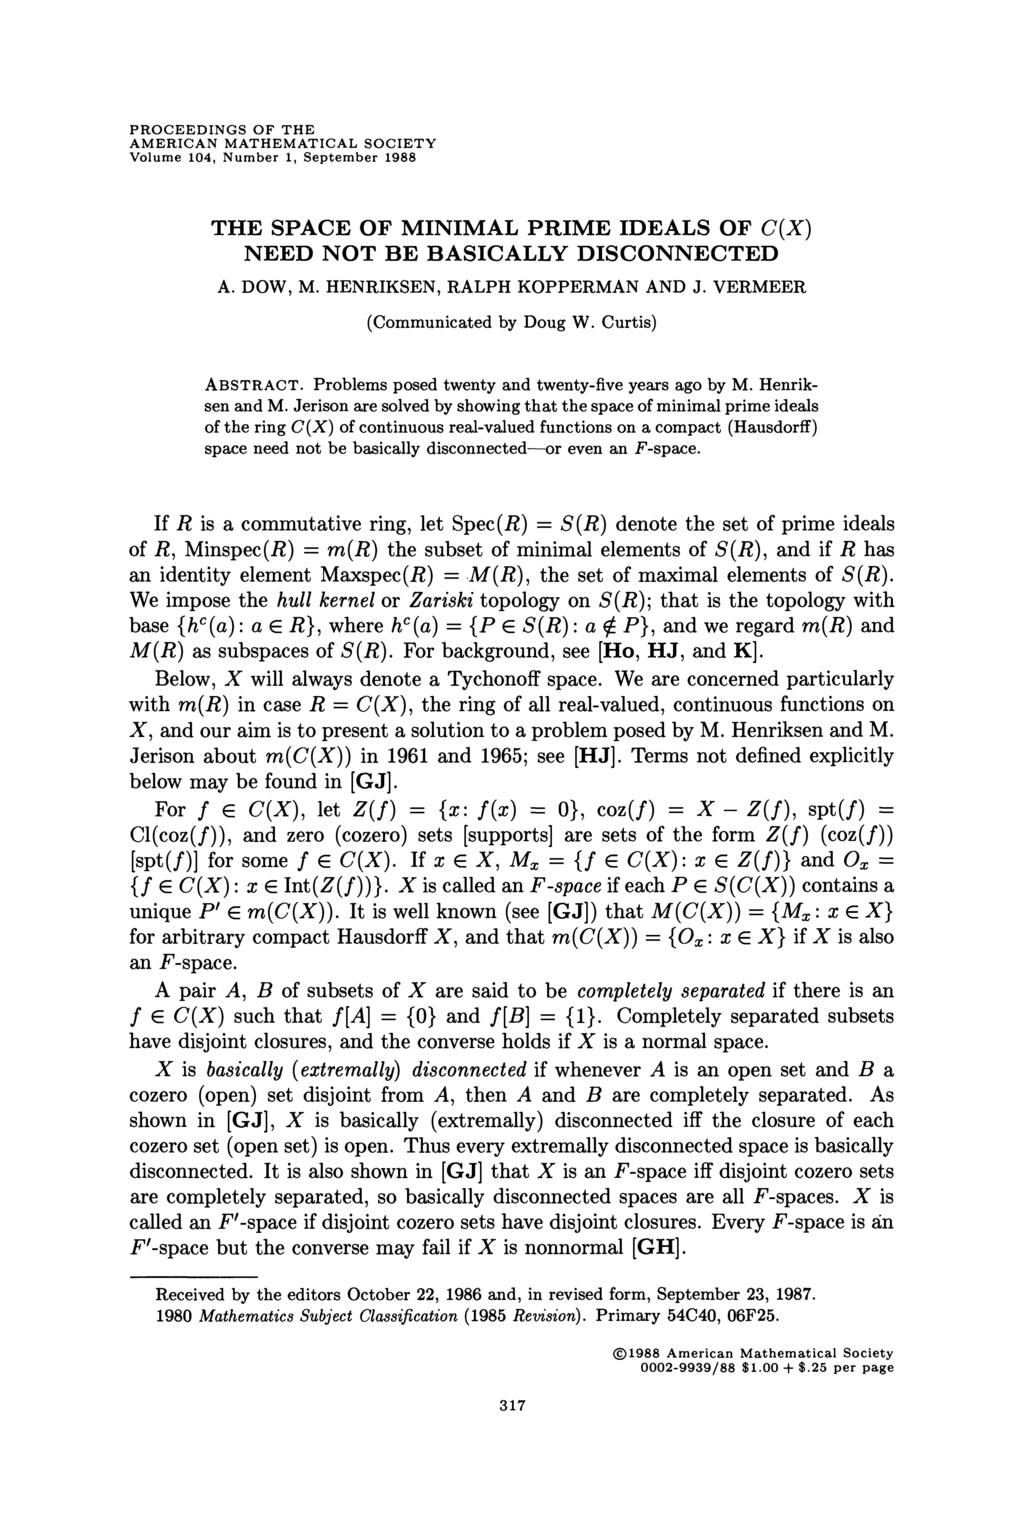 PROCEEDINGS OF THE AMERICAN MATHEMATICAL SOCIETY Volume 104, Number 1, September 1988 THE SPACE OF MINIMAL PRIME IDEALS OF C(X) NEED NOT BE BASICALLY DISCONNECTED A. DOW, M.